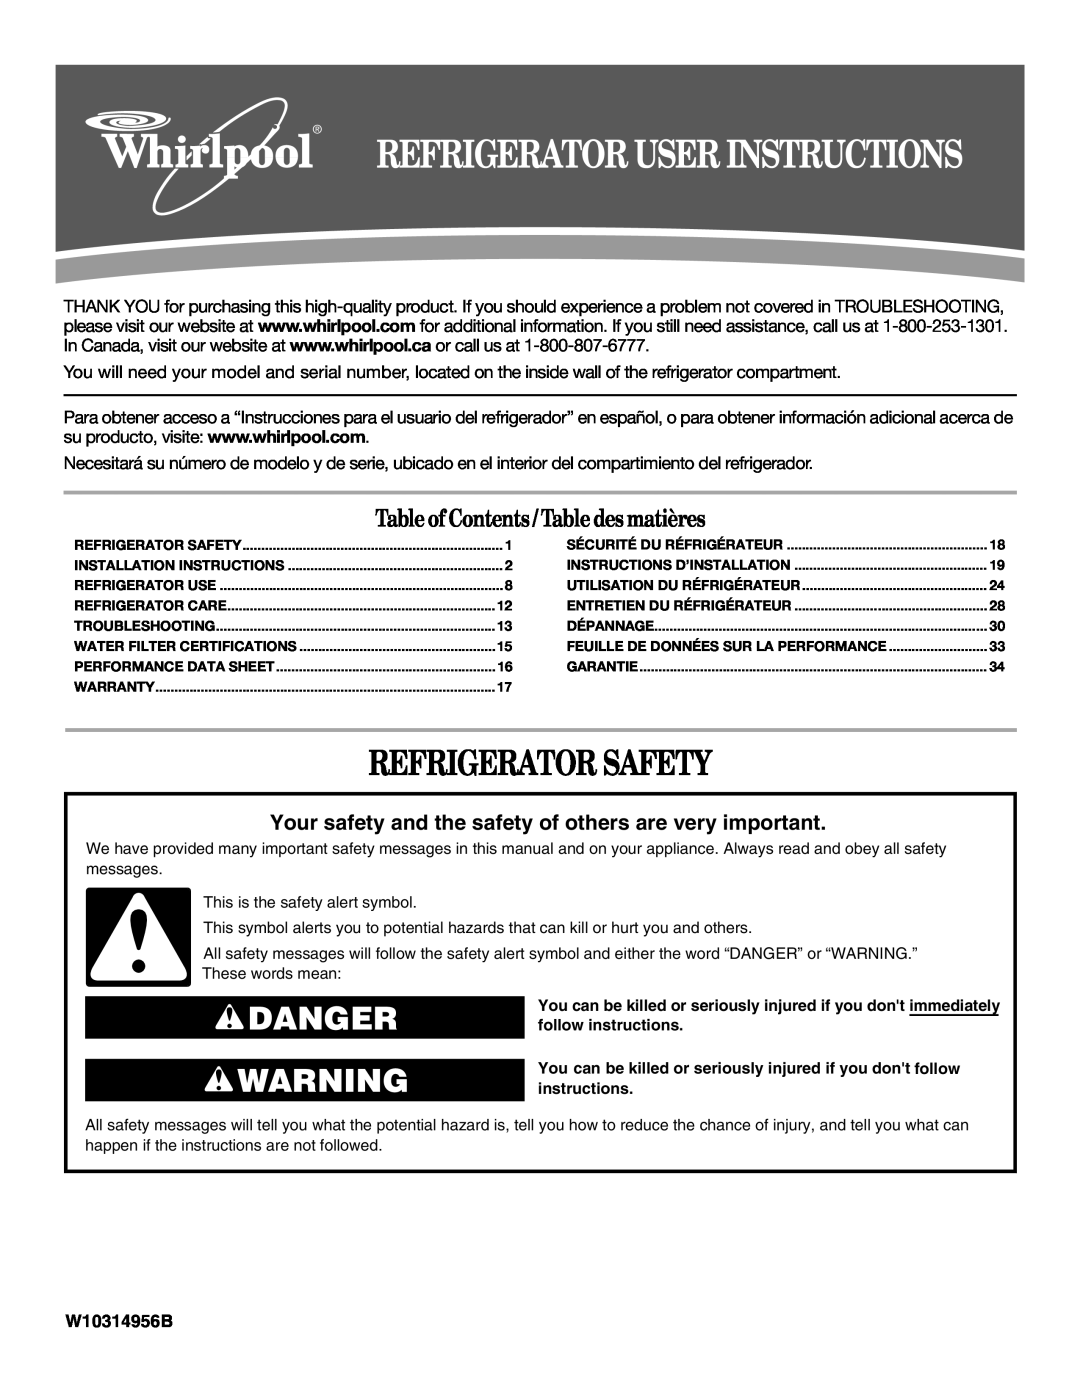 Whirlpool W10314956B installation instructions Refrigerator Safety, Danger, Table of Contents / Table des matières 